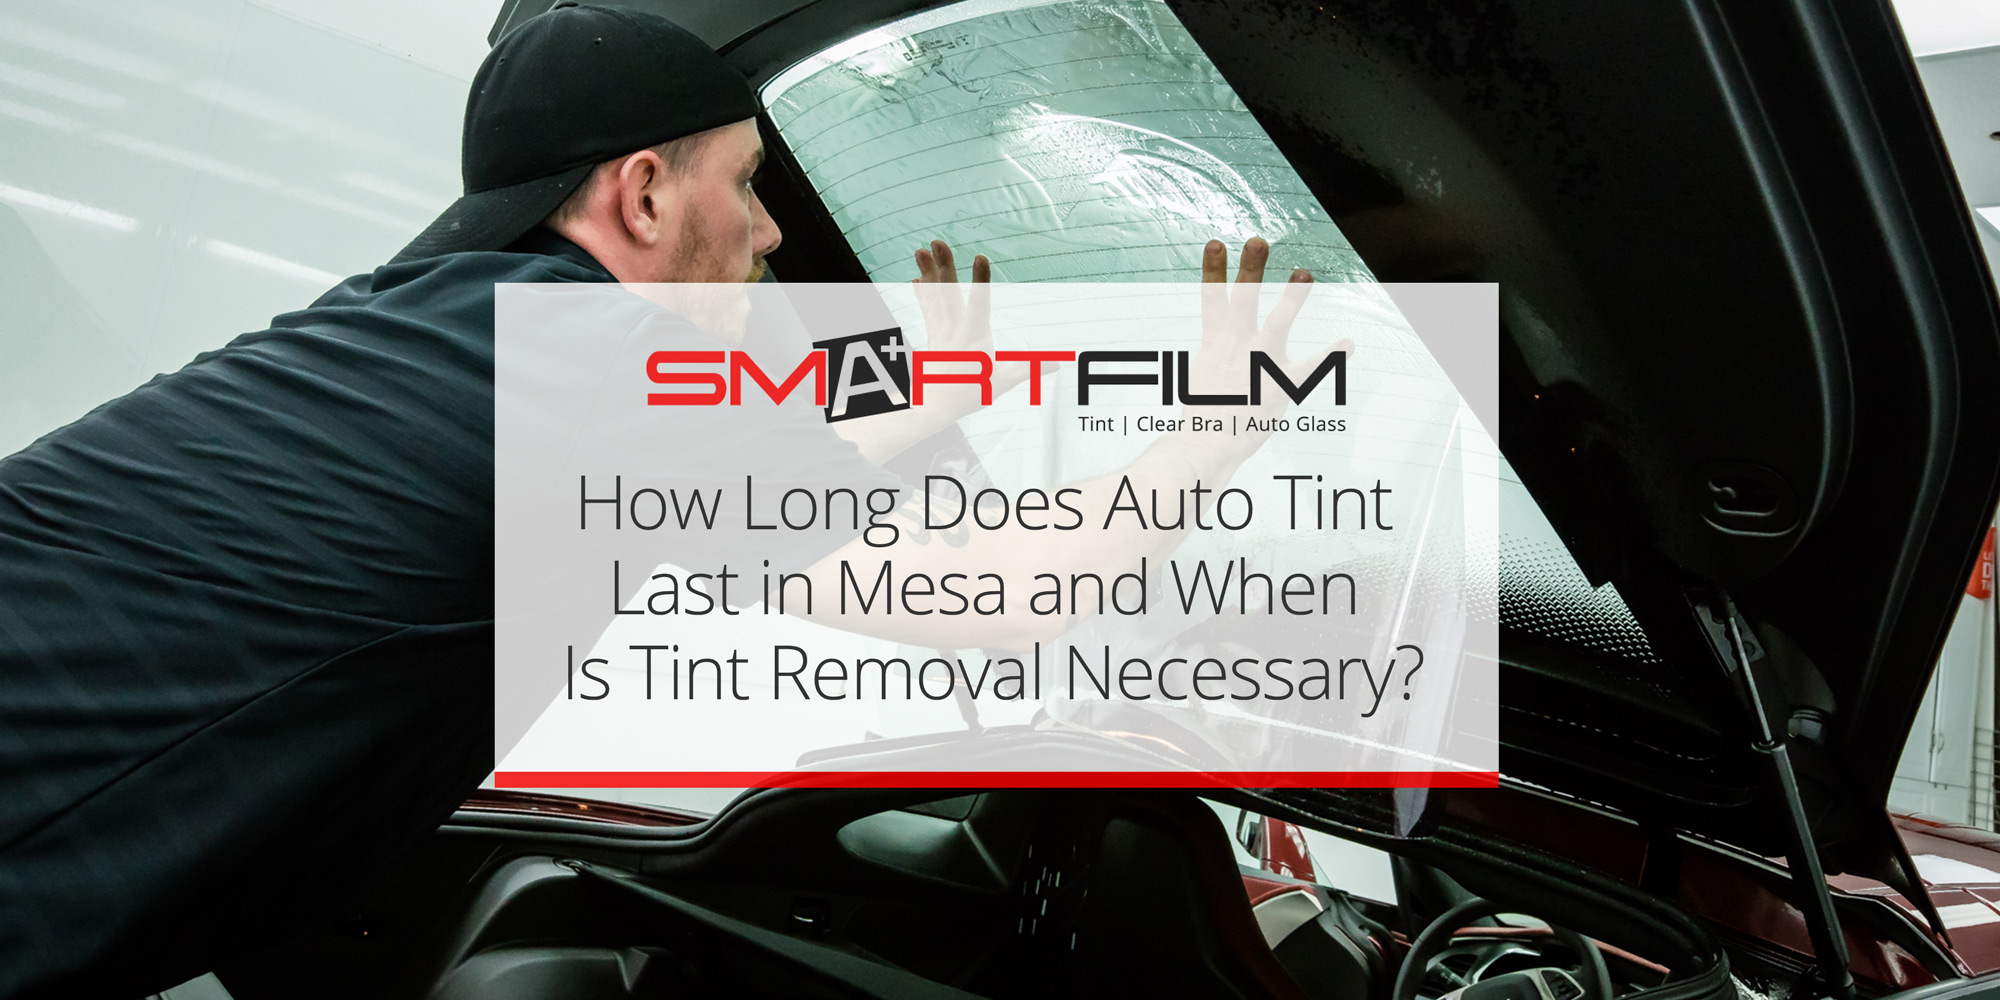 Tips for Removing Bubbles from Vehicle Window Tinting - SmartFilm AZ